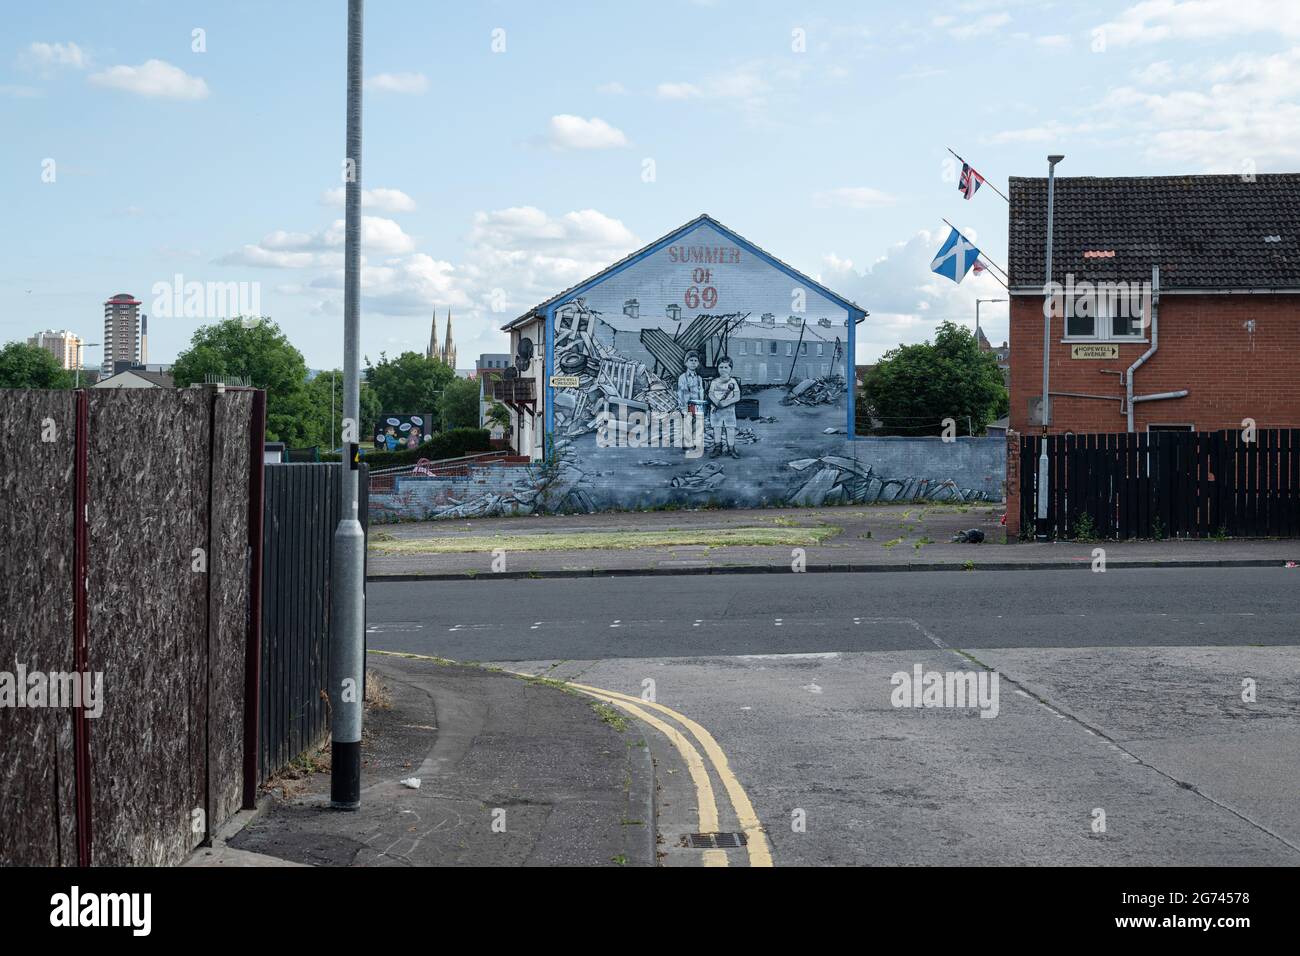 The ìSummer of '69î mural at Hopewell Crescent off the Crumlin road in the Shankil estate, which depicts the devastation which occurred during the Summer of 1969.Communities on both sides fear a return to a volatile state in the North due to fresh tensions as a result of post Brexit protocols. Preparations in lieu of July 11th bonfire night in Belfast before the annual July 12th Orange Order marches. This year marks the centenary of the formation of Northern Ireland and is also the first permitted Orange marches since the beginning of the pandemic. The marching season has fallen during a tense Stock Photo